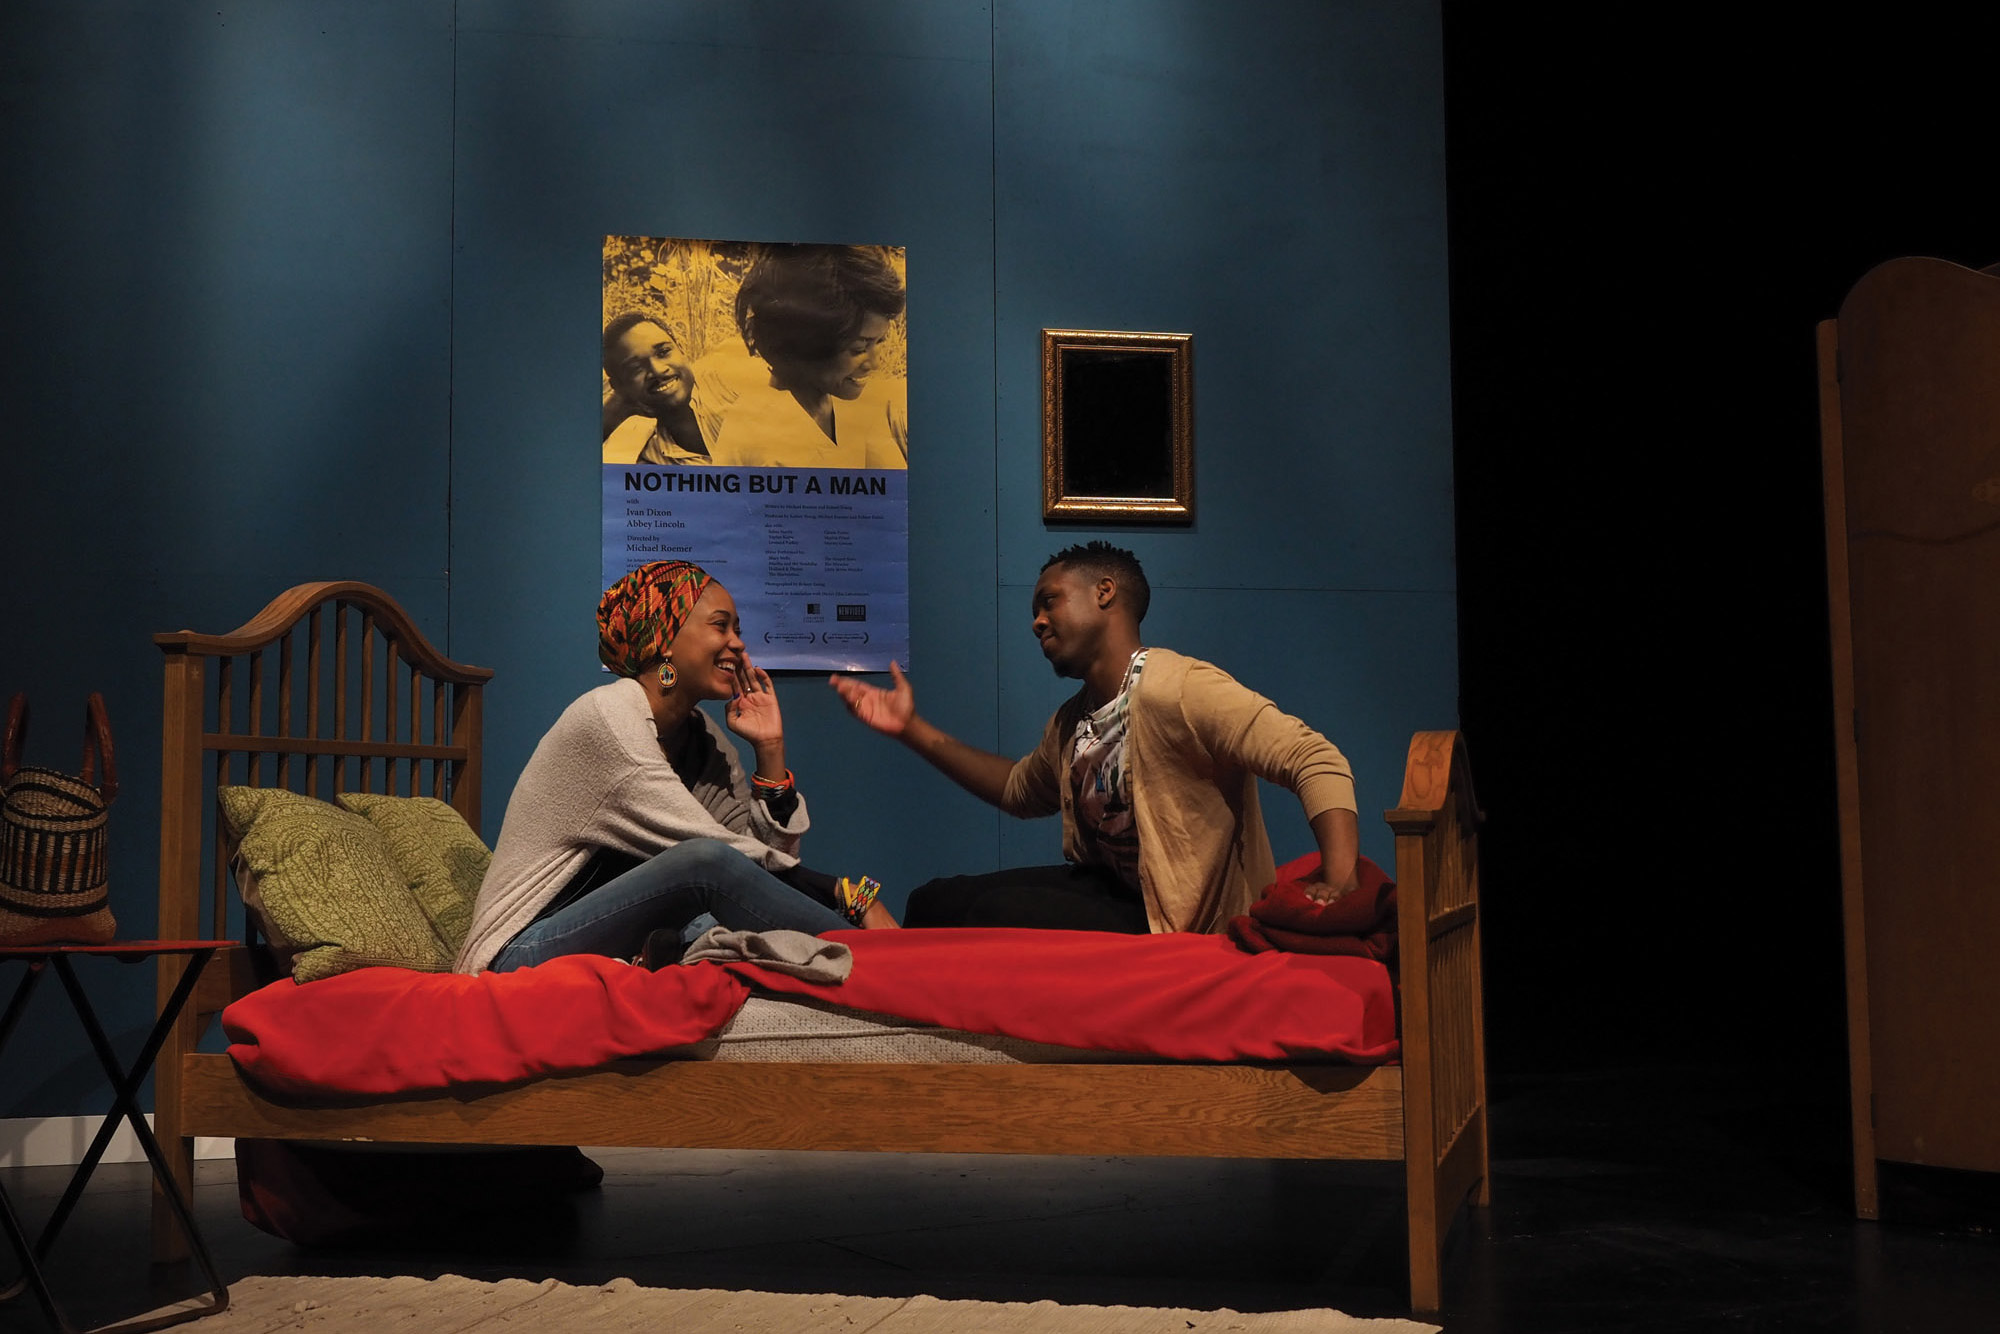 A Black woman and a Black man in a blue room sitting on a bed with red sheets in animated joyous conversation. 